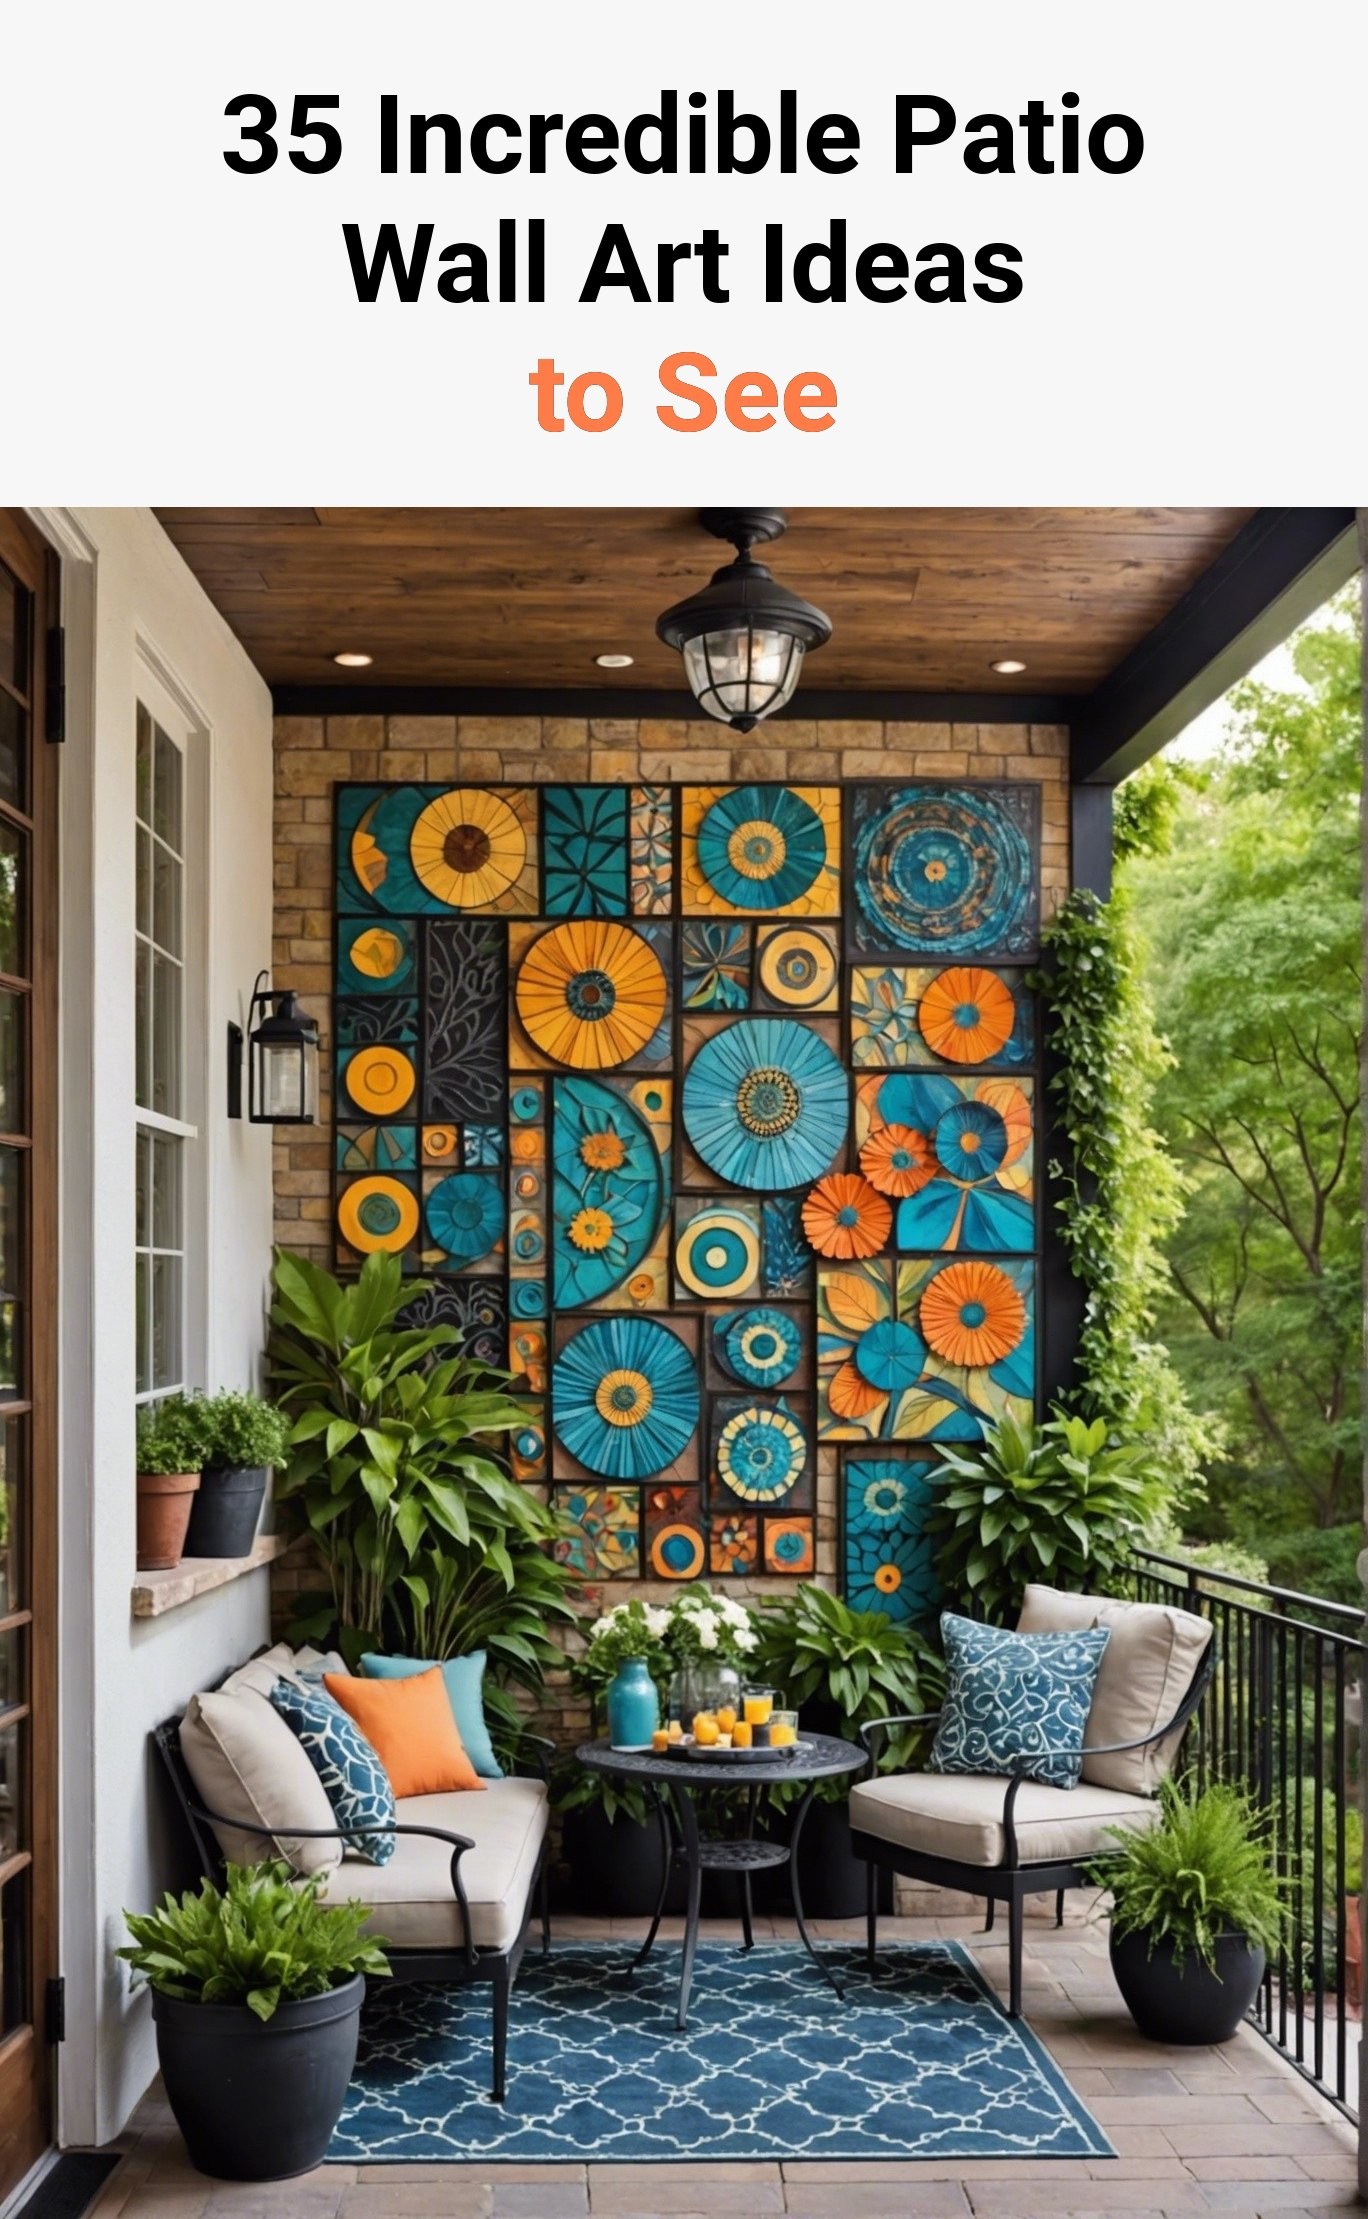 35 Incredible Patio Wall Art Ideas to See